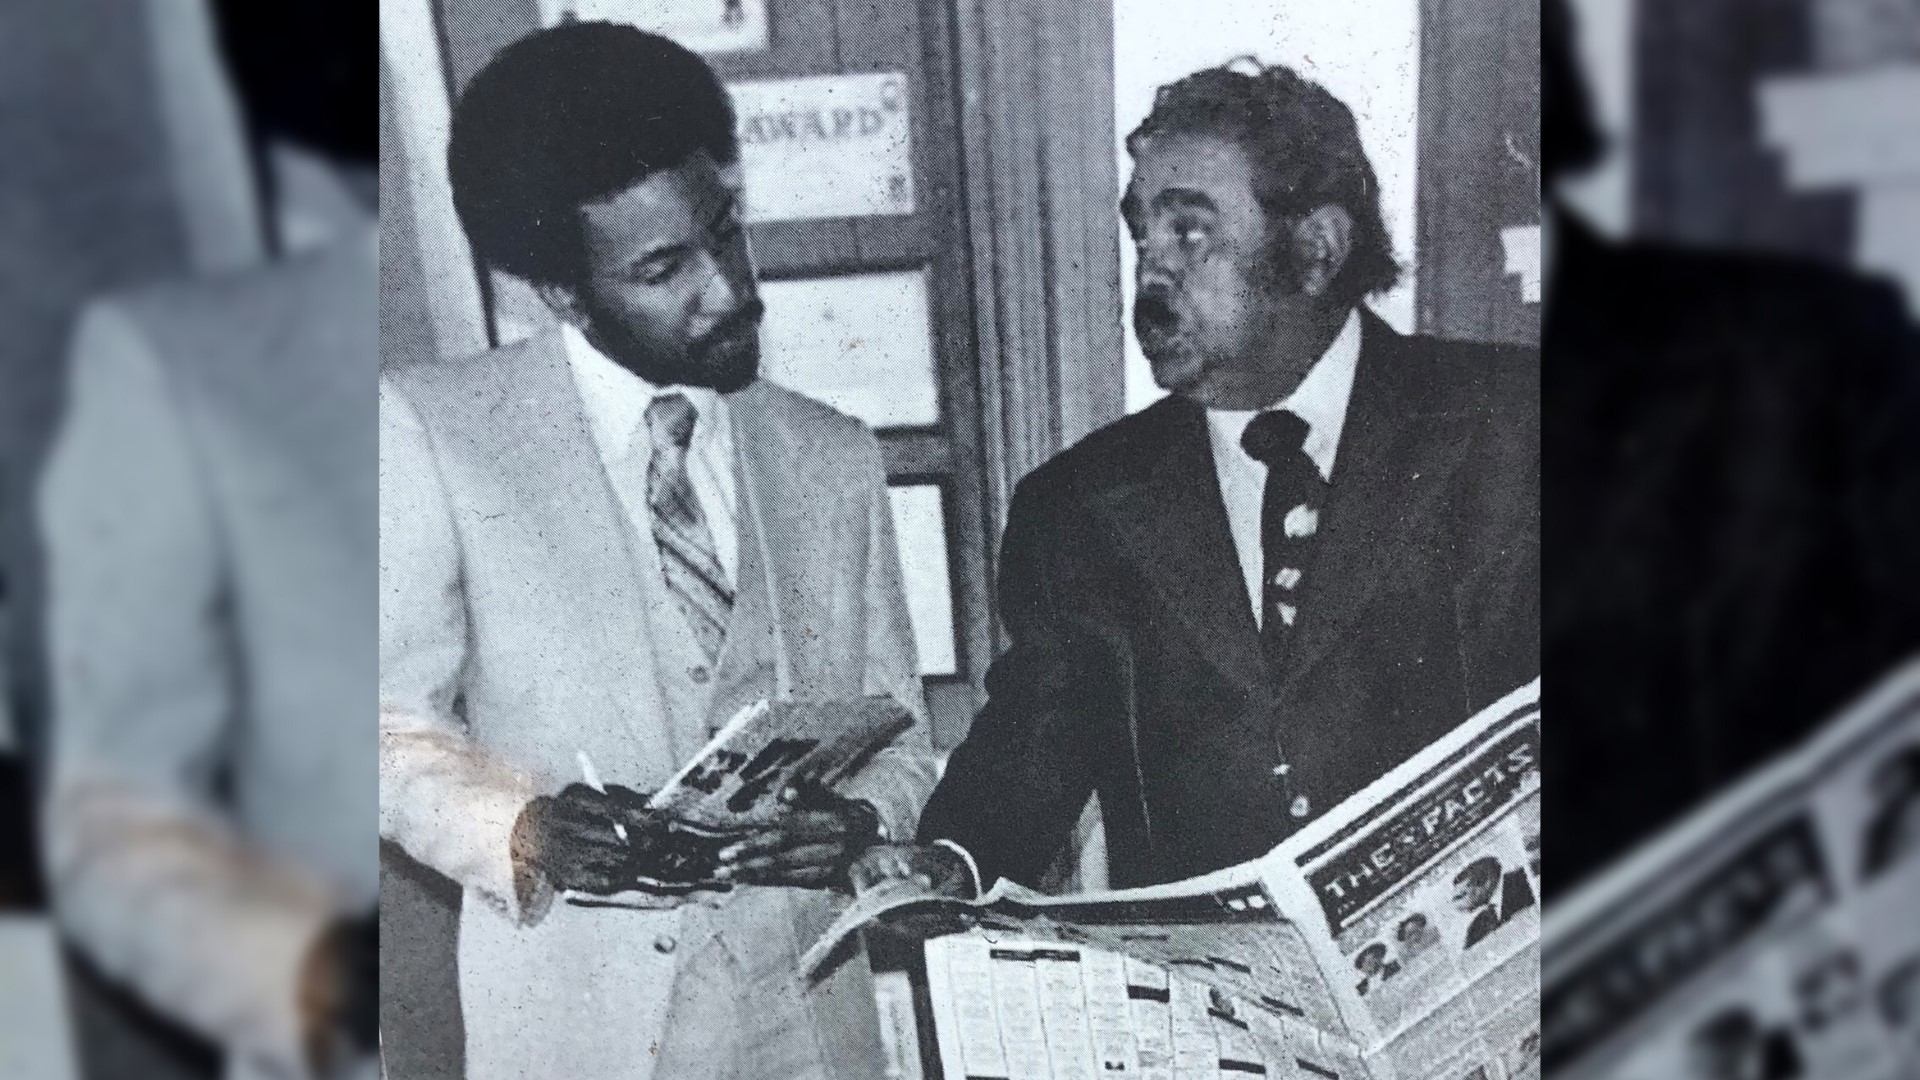 Converge Media founder Omari Salisbury pays homage to Fitzgerald Beaver, who founded "The Facts" newspaper in 1961. #k5evening